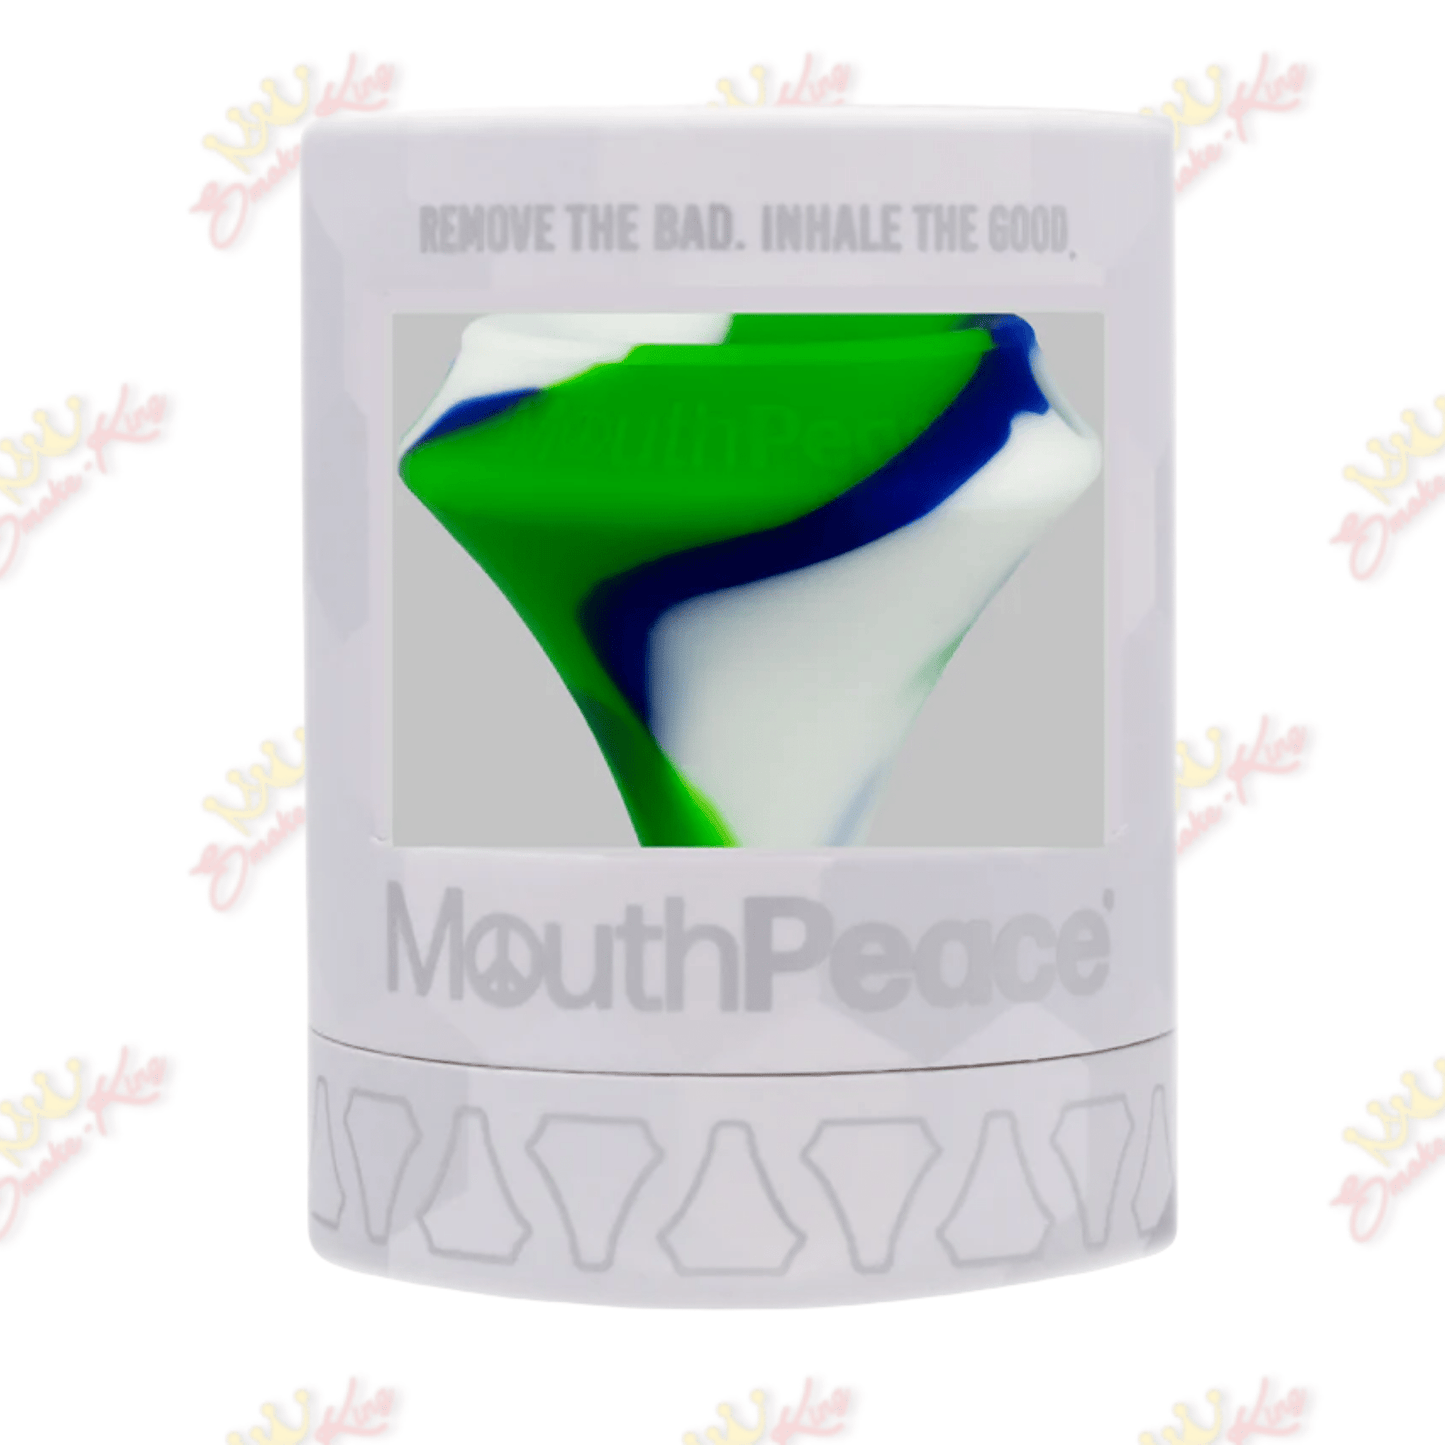 Moose Labs Earth Bong Filter Mouth Piece